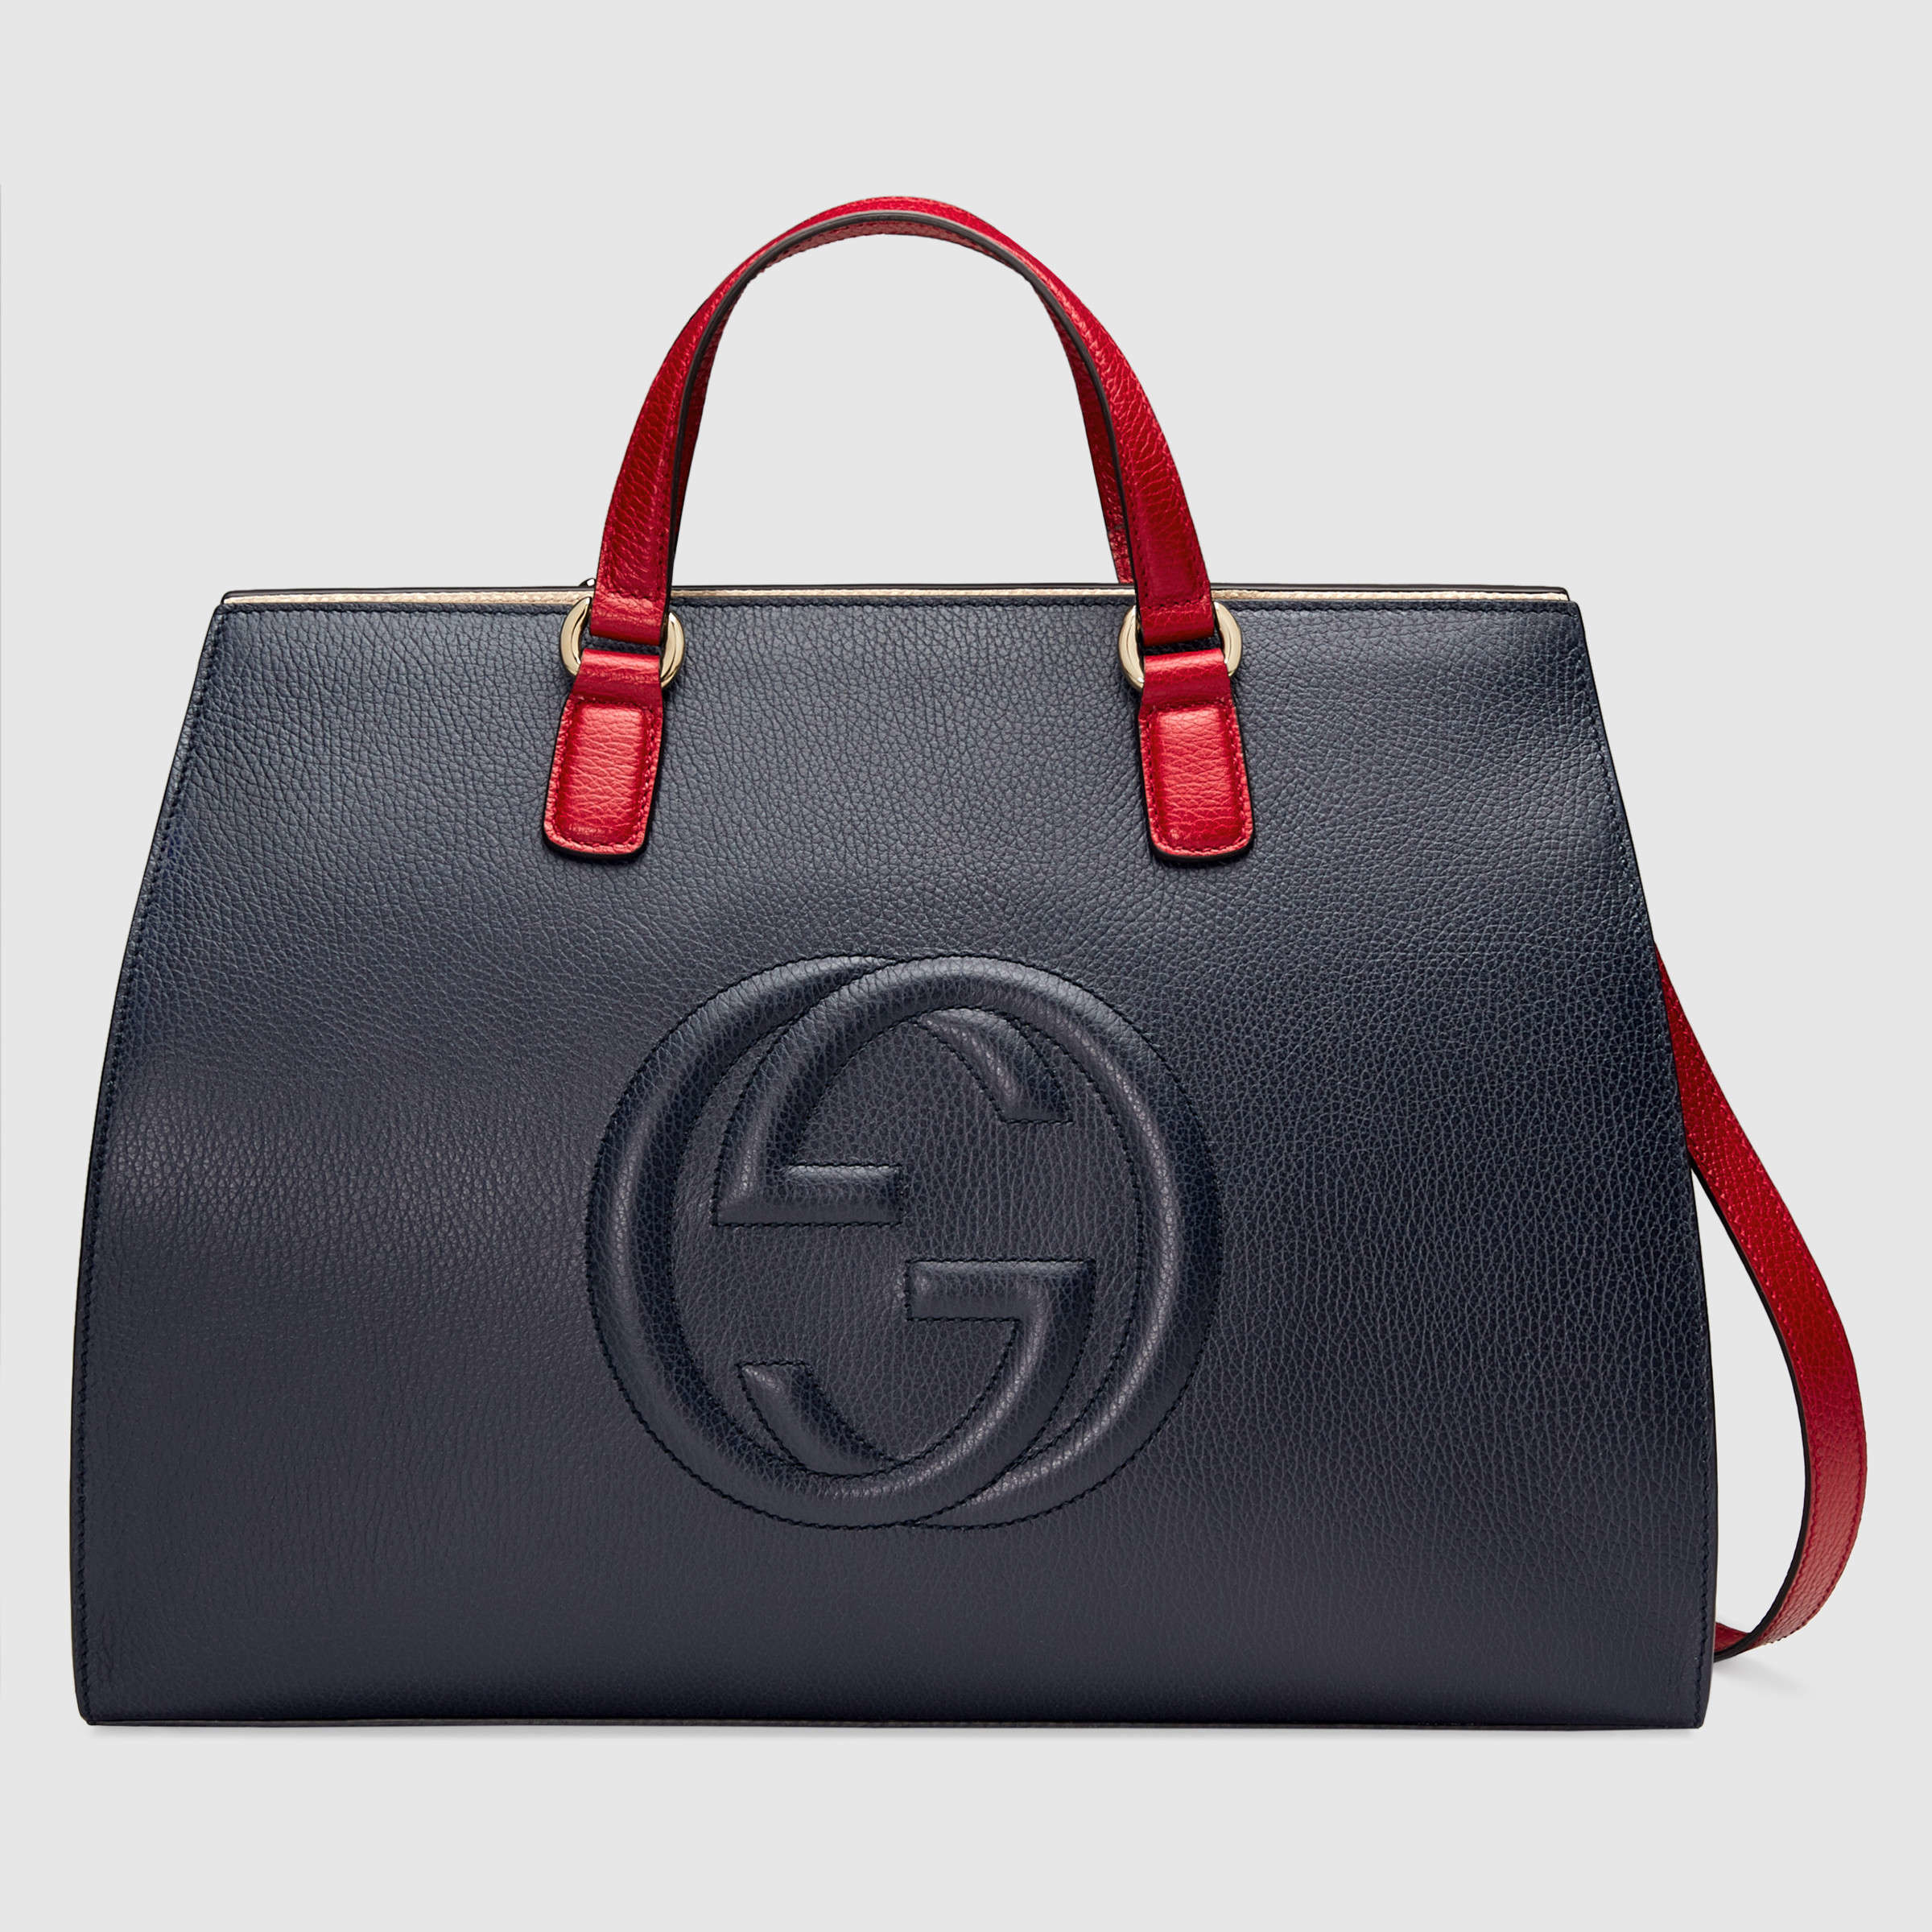 Lyst - Gucci Soho Leather Top Handle Bag in Blue